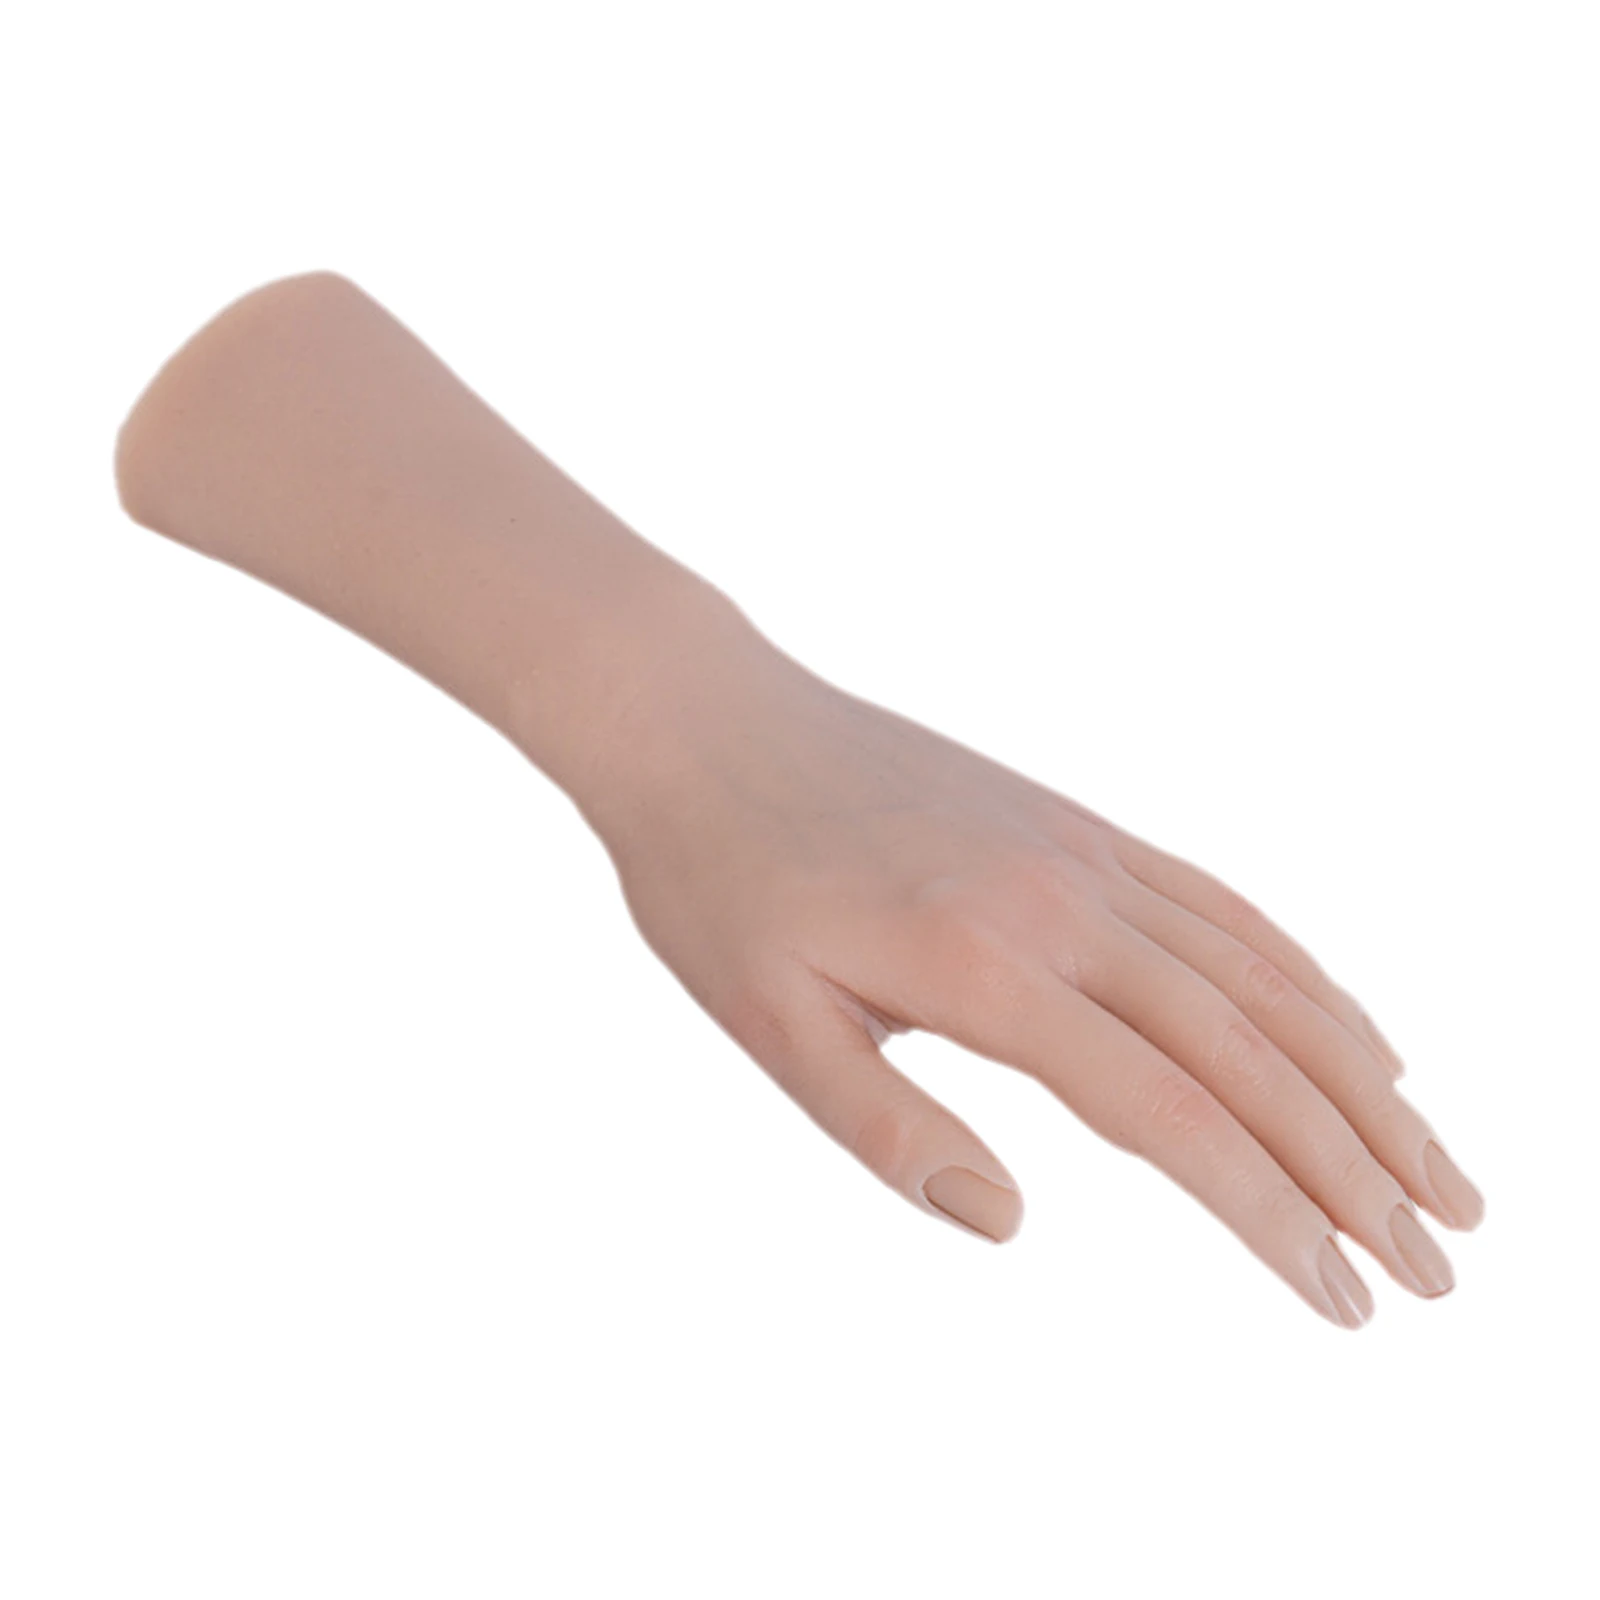 Soft Silicone Practice Hand Mannequin Flexible for Acrylic Nails Nails Art Practice Tool Nail Display Manicure Supply